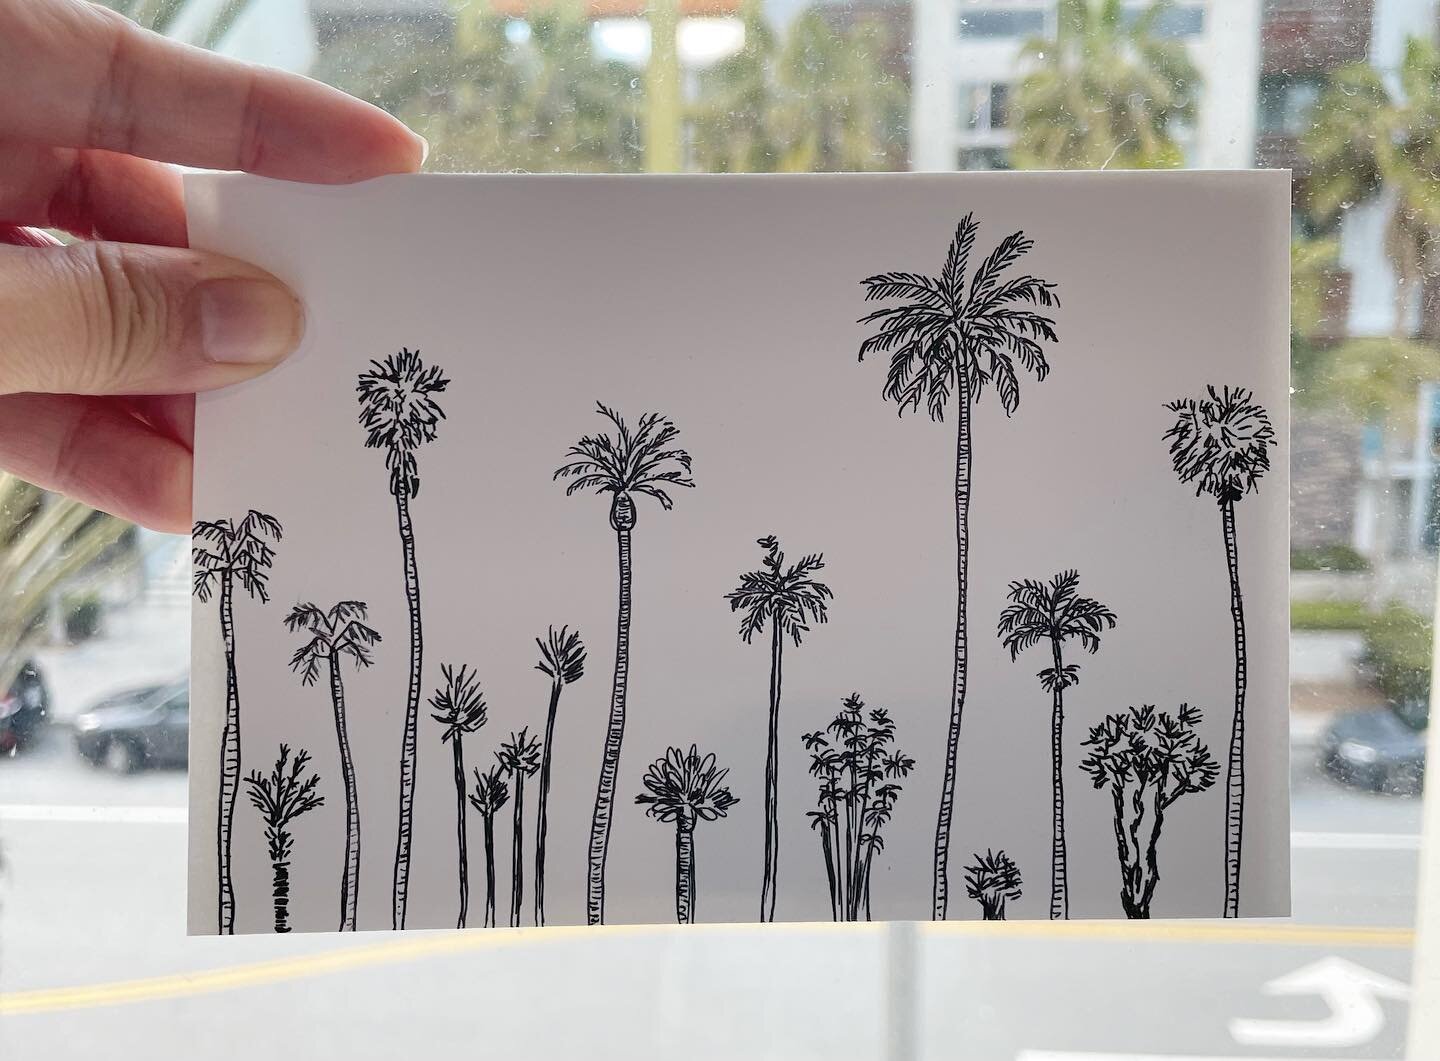 2/26/23: About six years ago, I moved to LA and I hated the palm trees because they are the worst tree of all trees. Fast forward six years later&hellip;and I still hate them. 

But at least I will draw them occasionally.